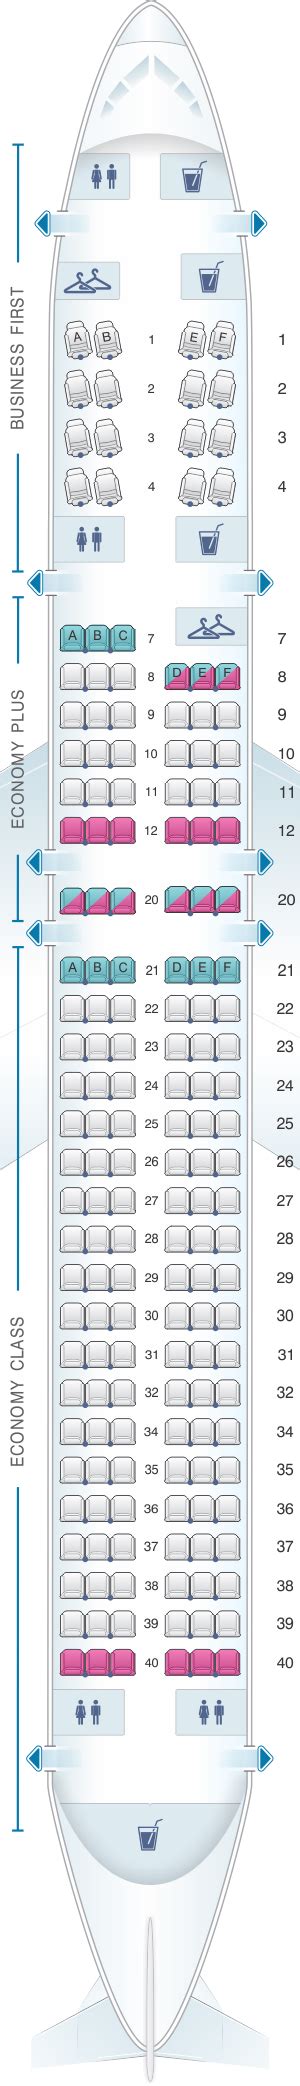 Seat Map United Airlines Boeing B757 200 752 Version 2